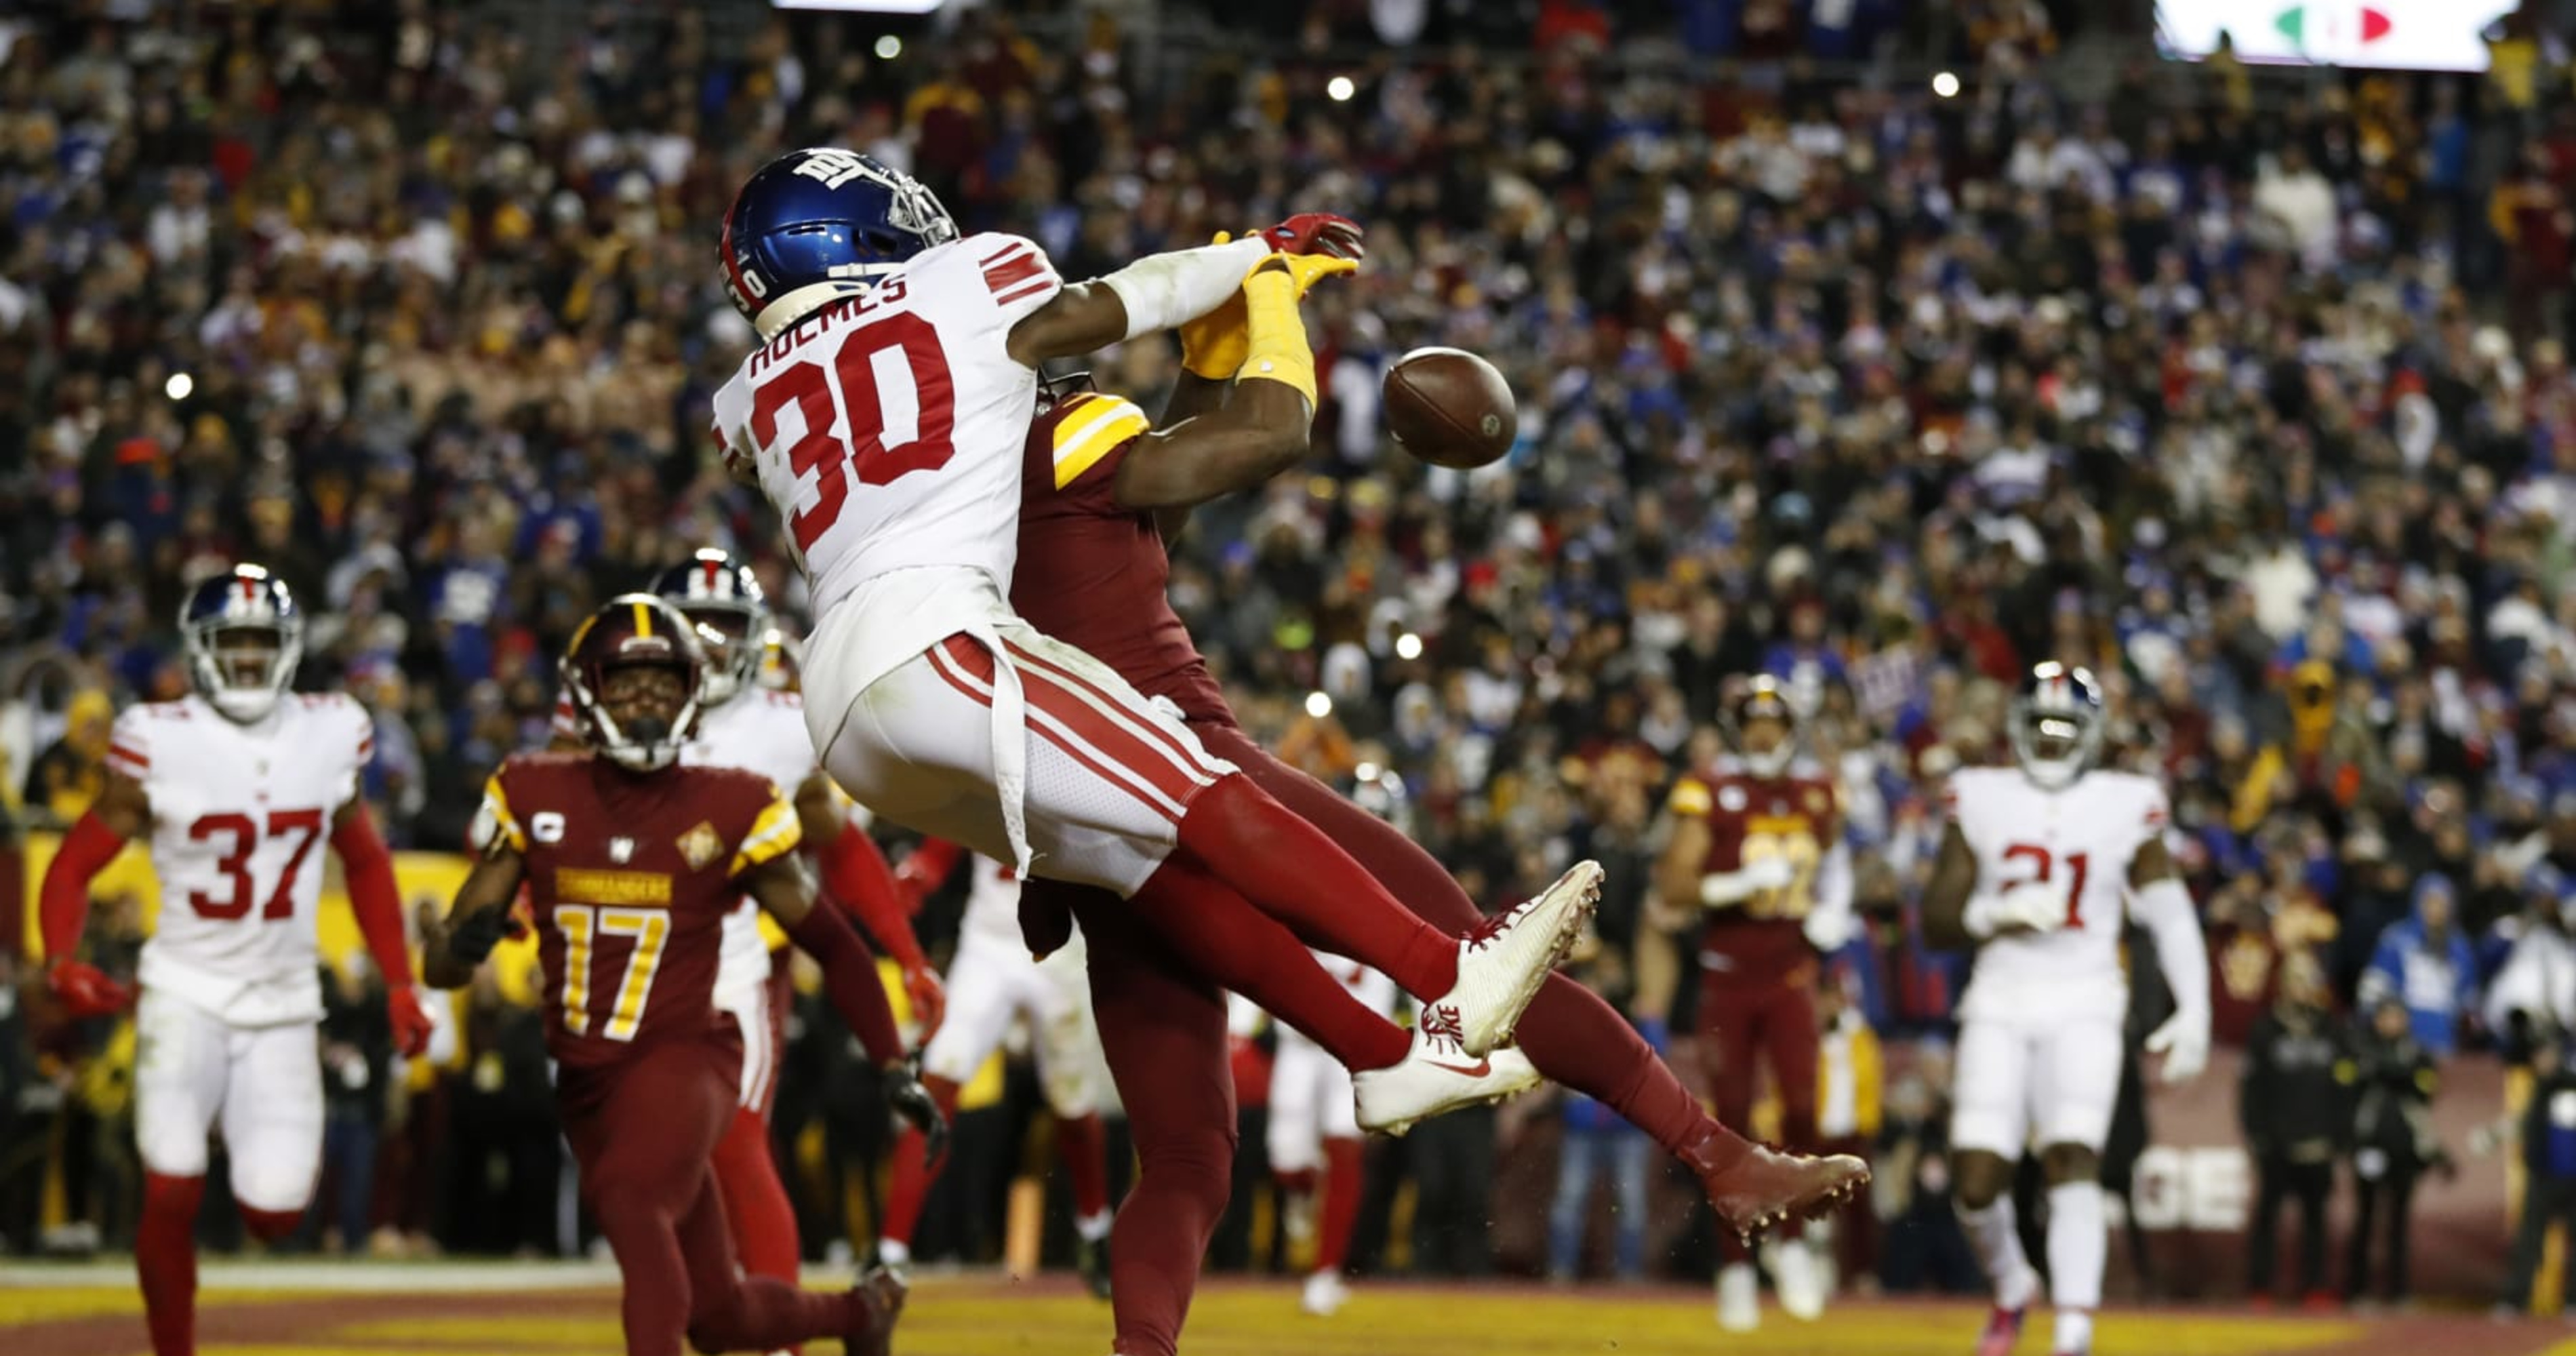 Report: NFL Told Commanders That Refs Missed DPI Call on Final Play vs. Giants